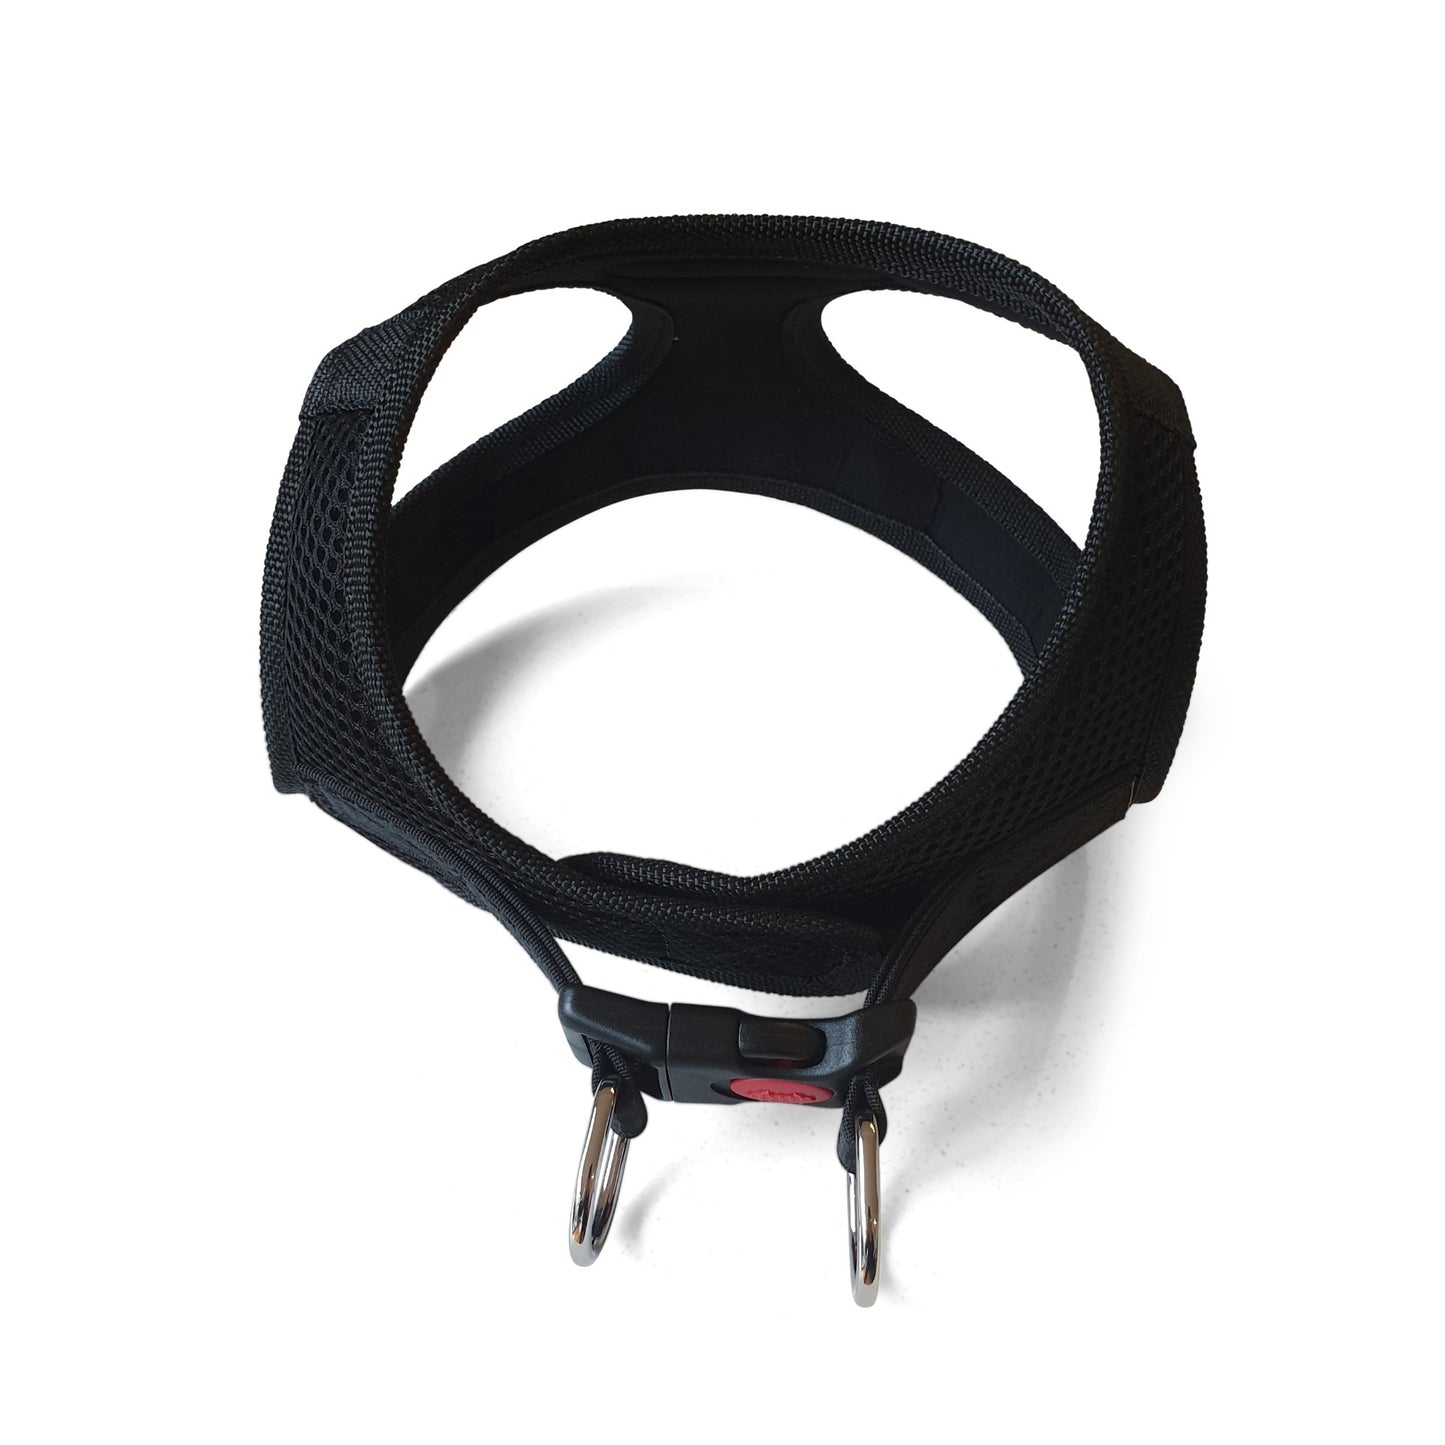 [Premium Quality Anti-Theft Dog Lead & Harness Online]-Safely Secured